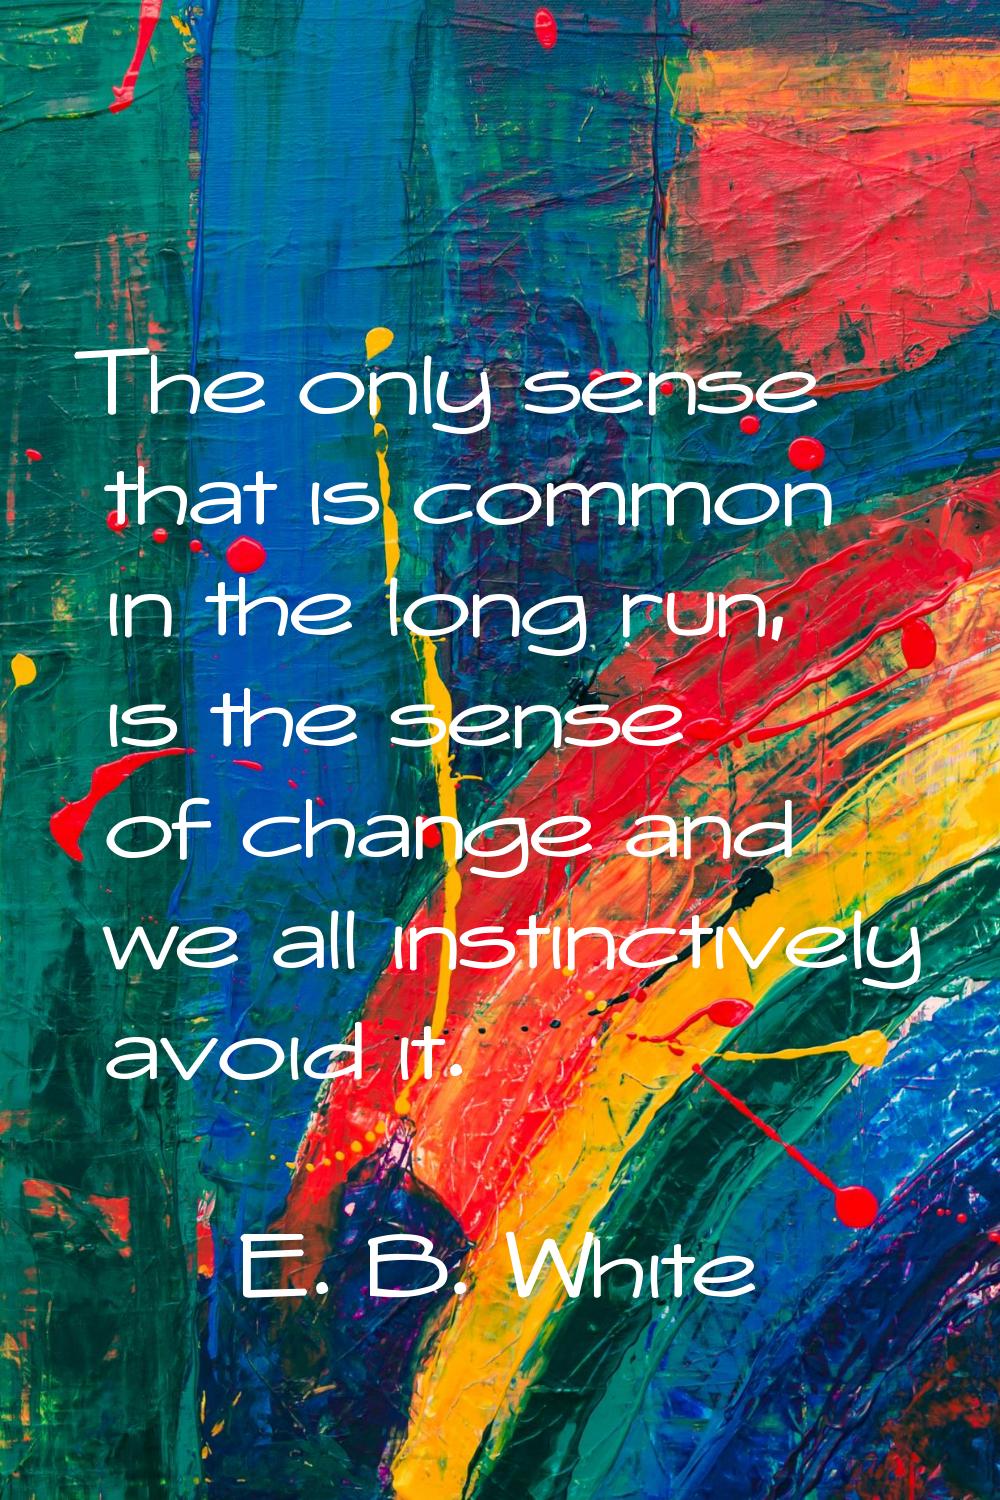 The only sense that is common in the long run, is the sense of change and we all instinctively avoi